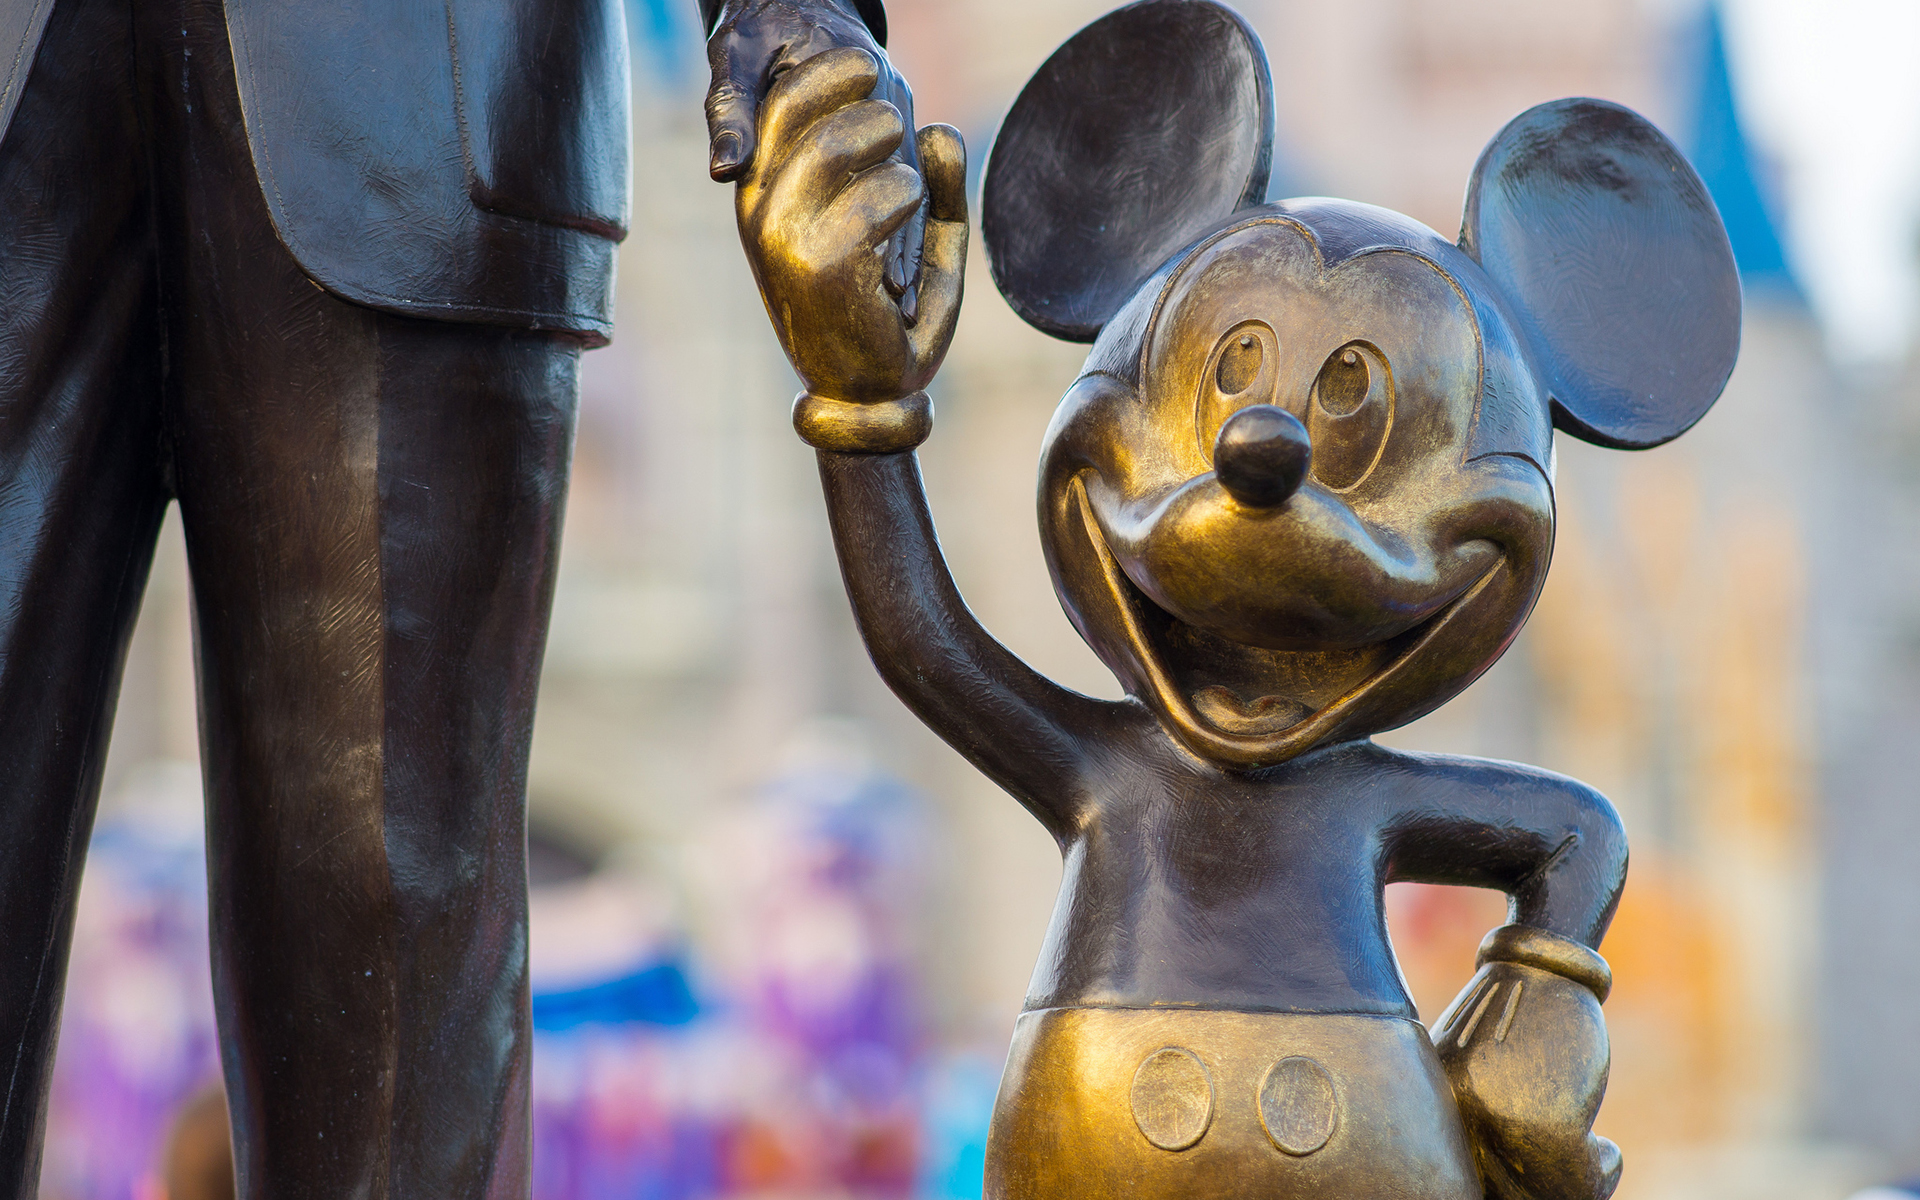 Download hd wallpapers of 110722-mickey, Mouse, Disney, Statue, Bronze, Car...